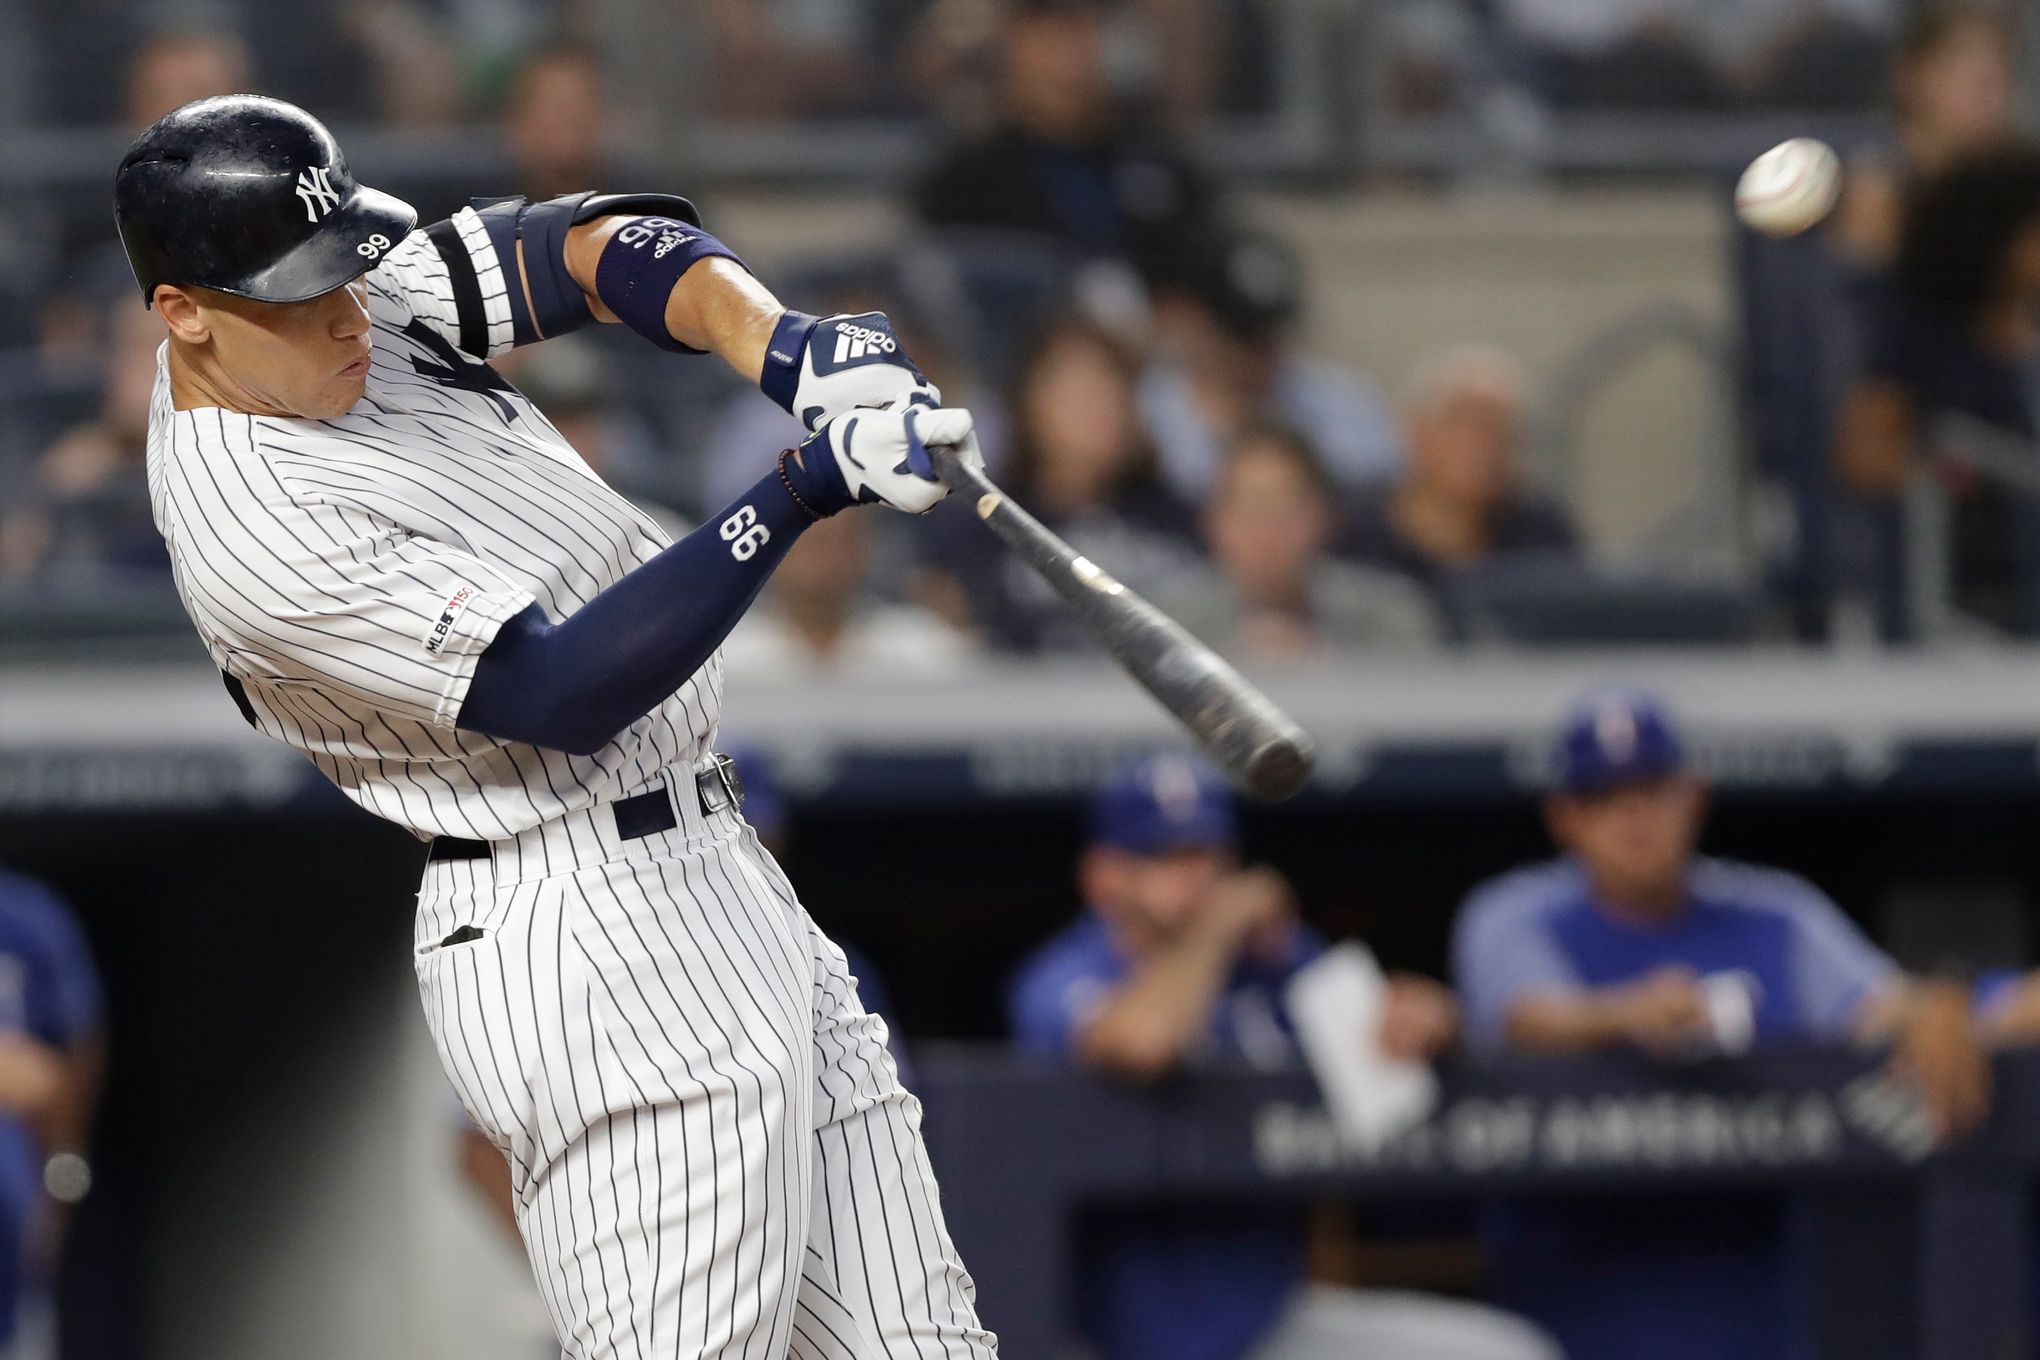 Gleyber Torres becomes youngest Yankee to hit a walk-off HR in win